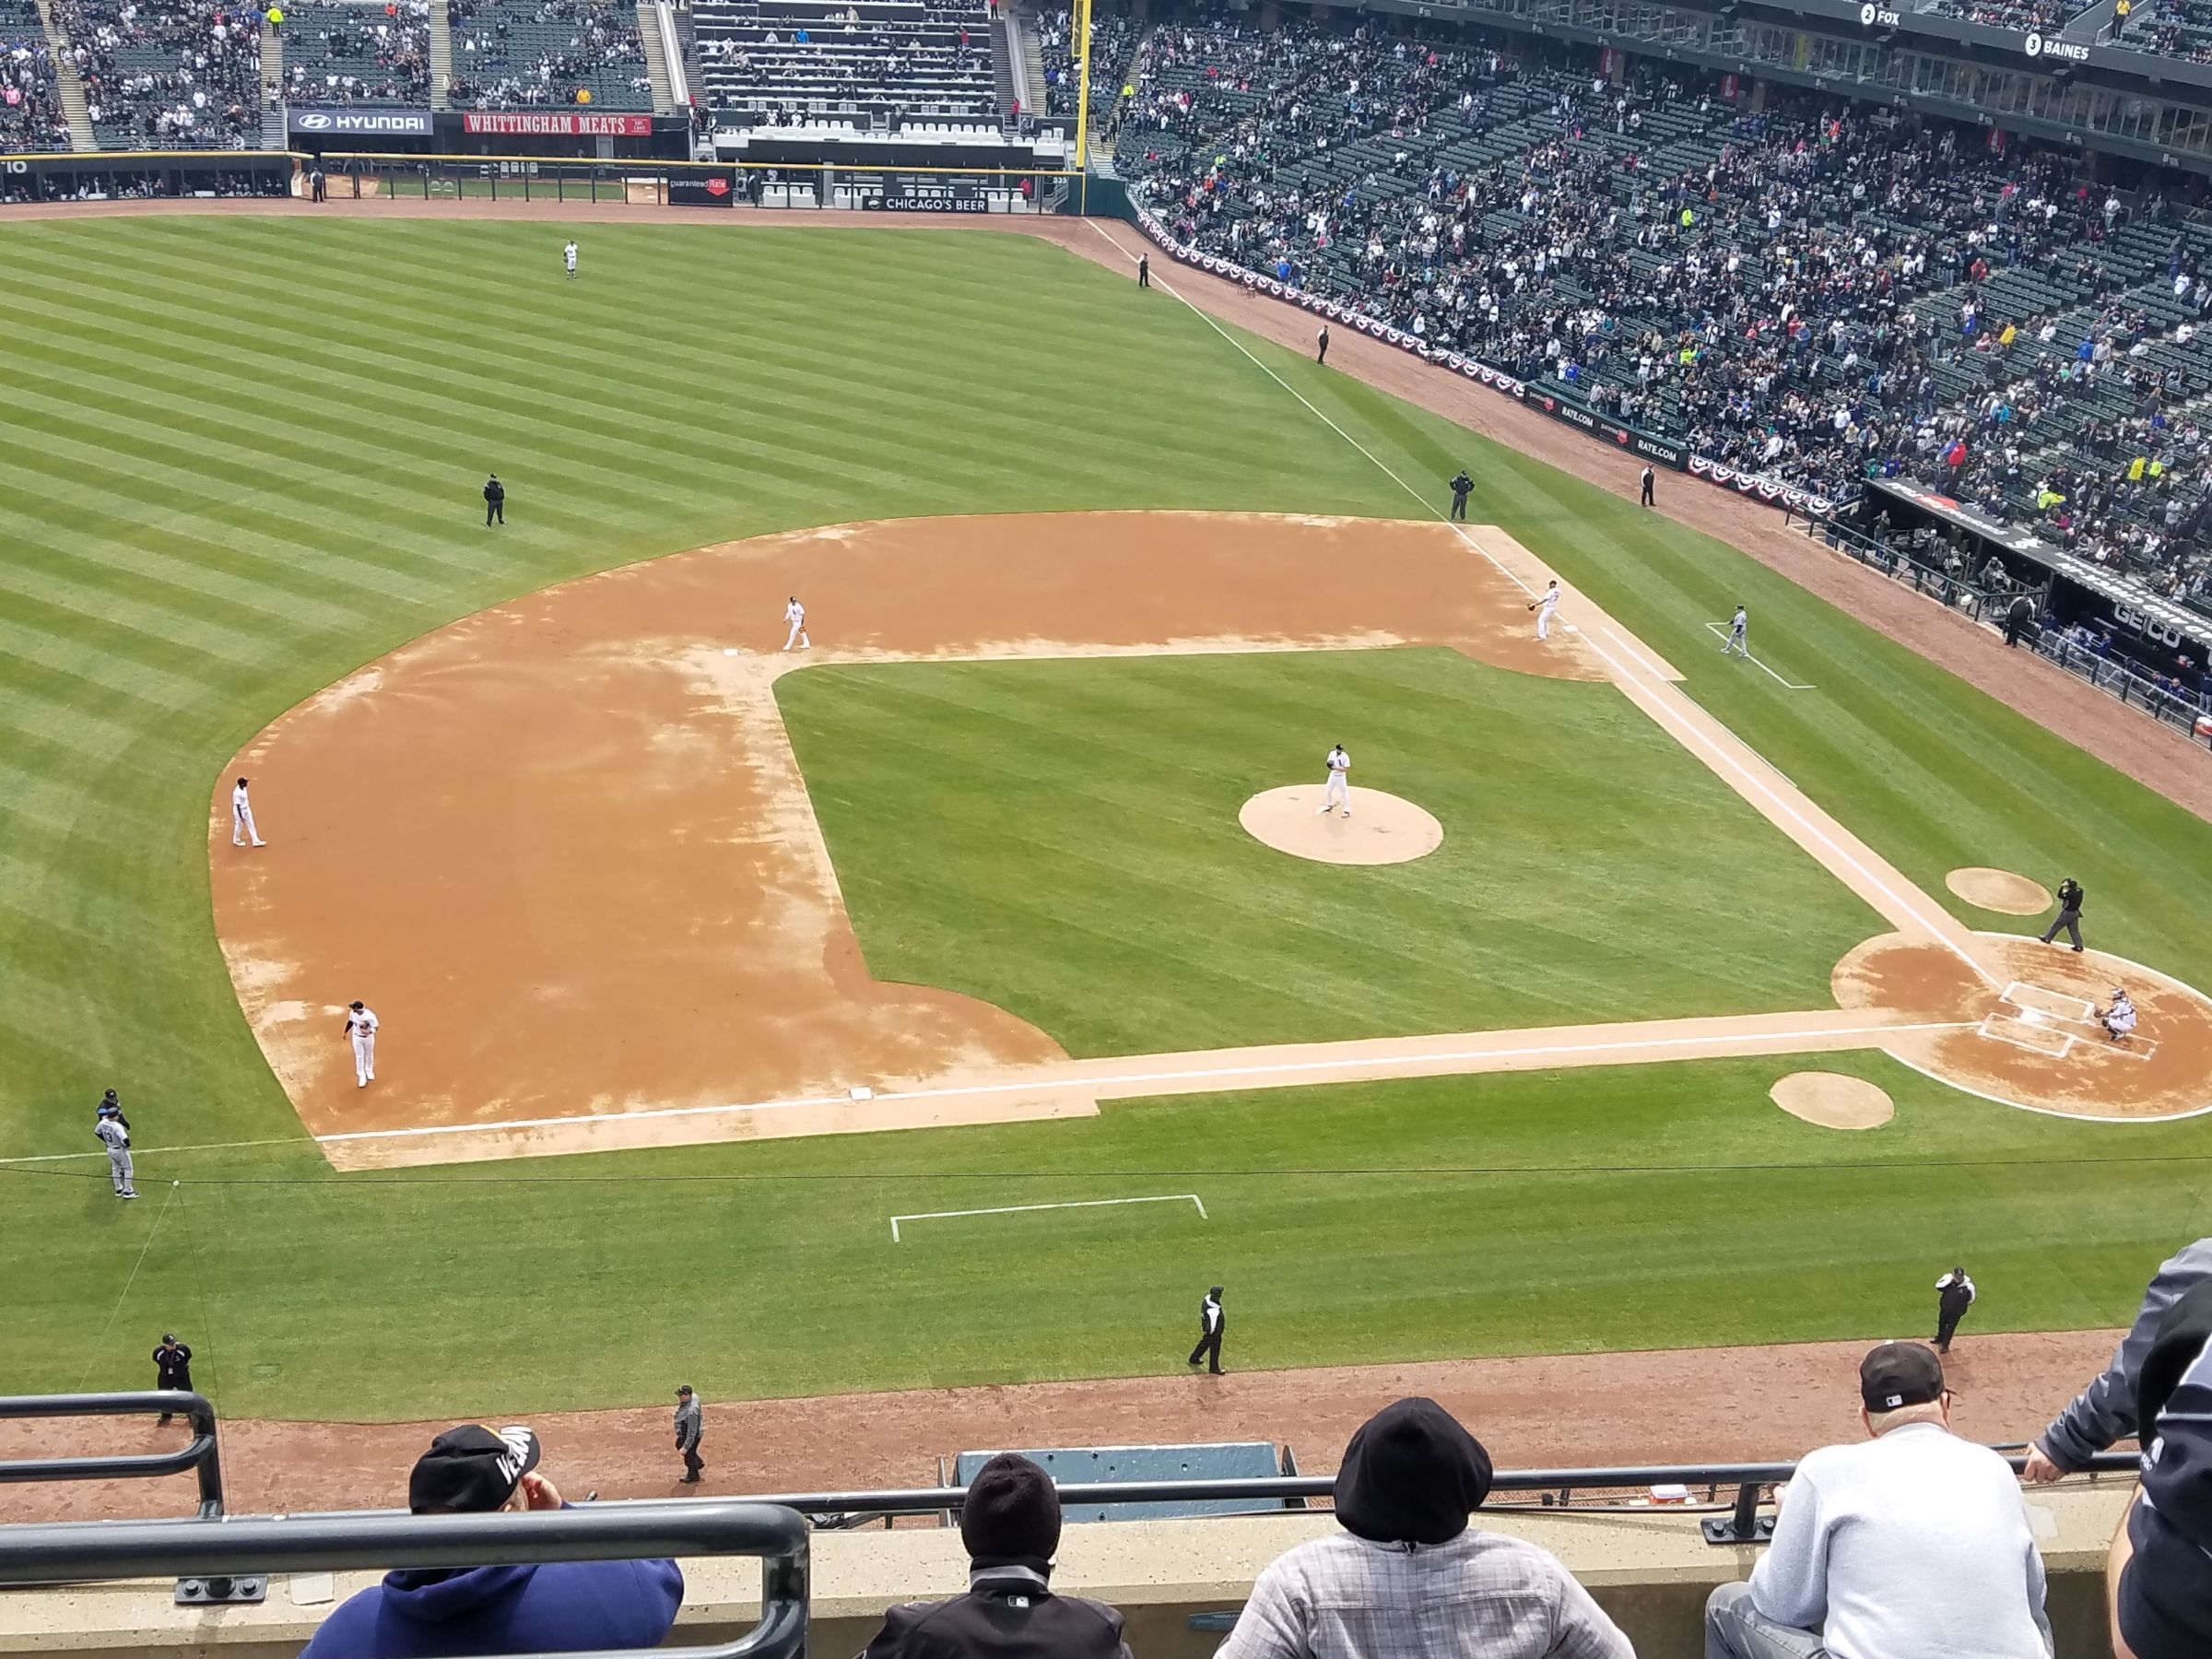 section 540, row 6 seat view  - guaranteed rate field